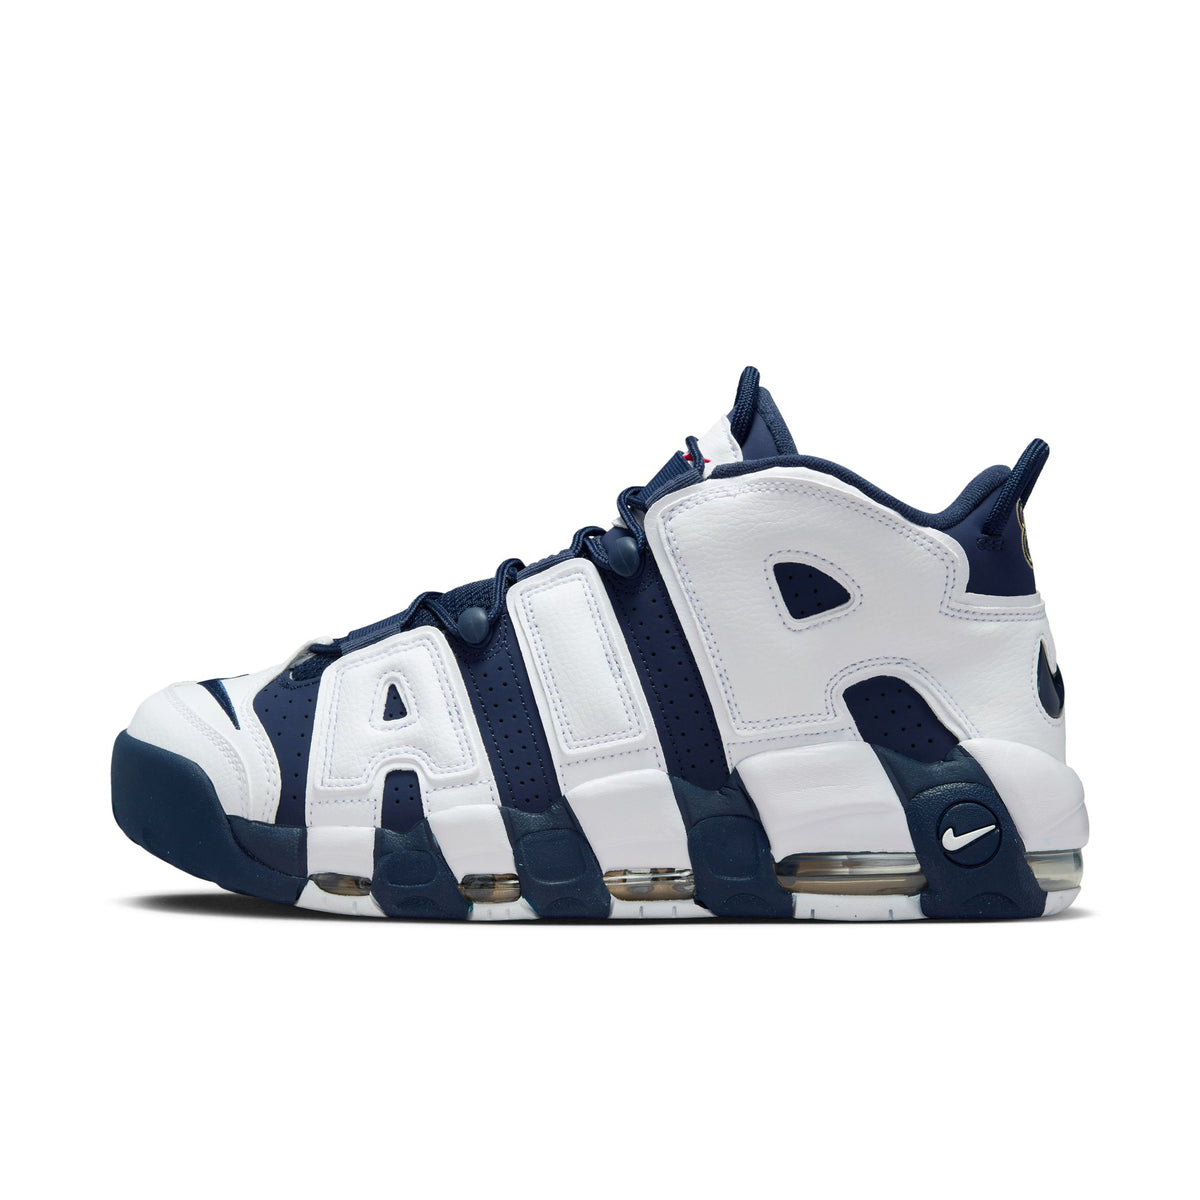 Nike Air More Uptempo '96 "Olympic" - Men